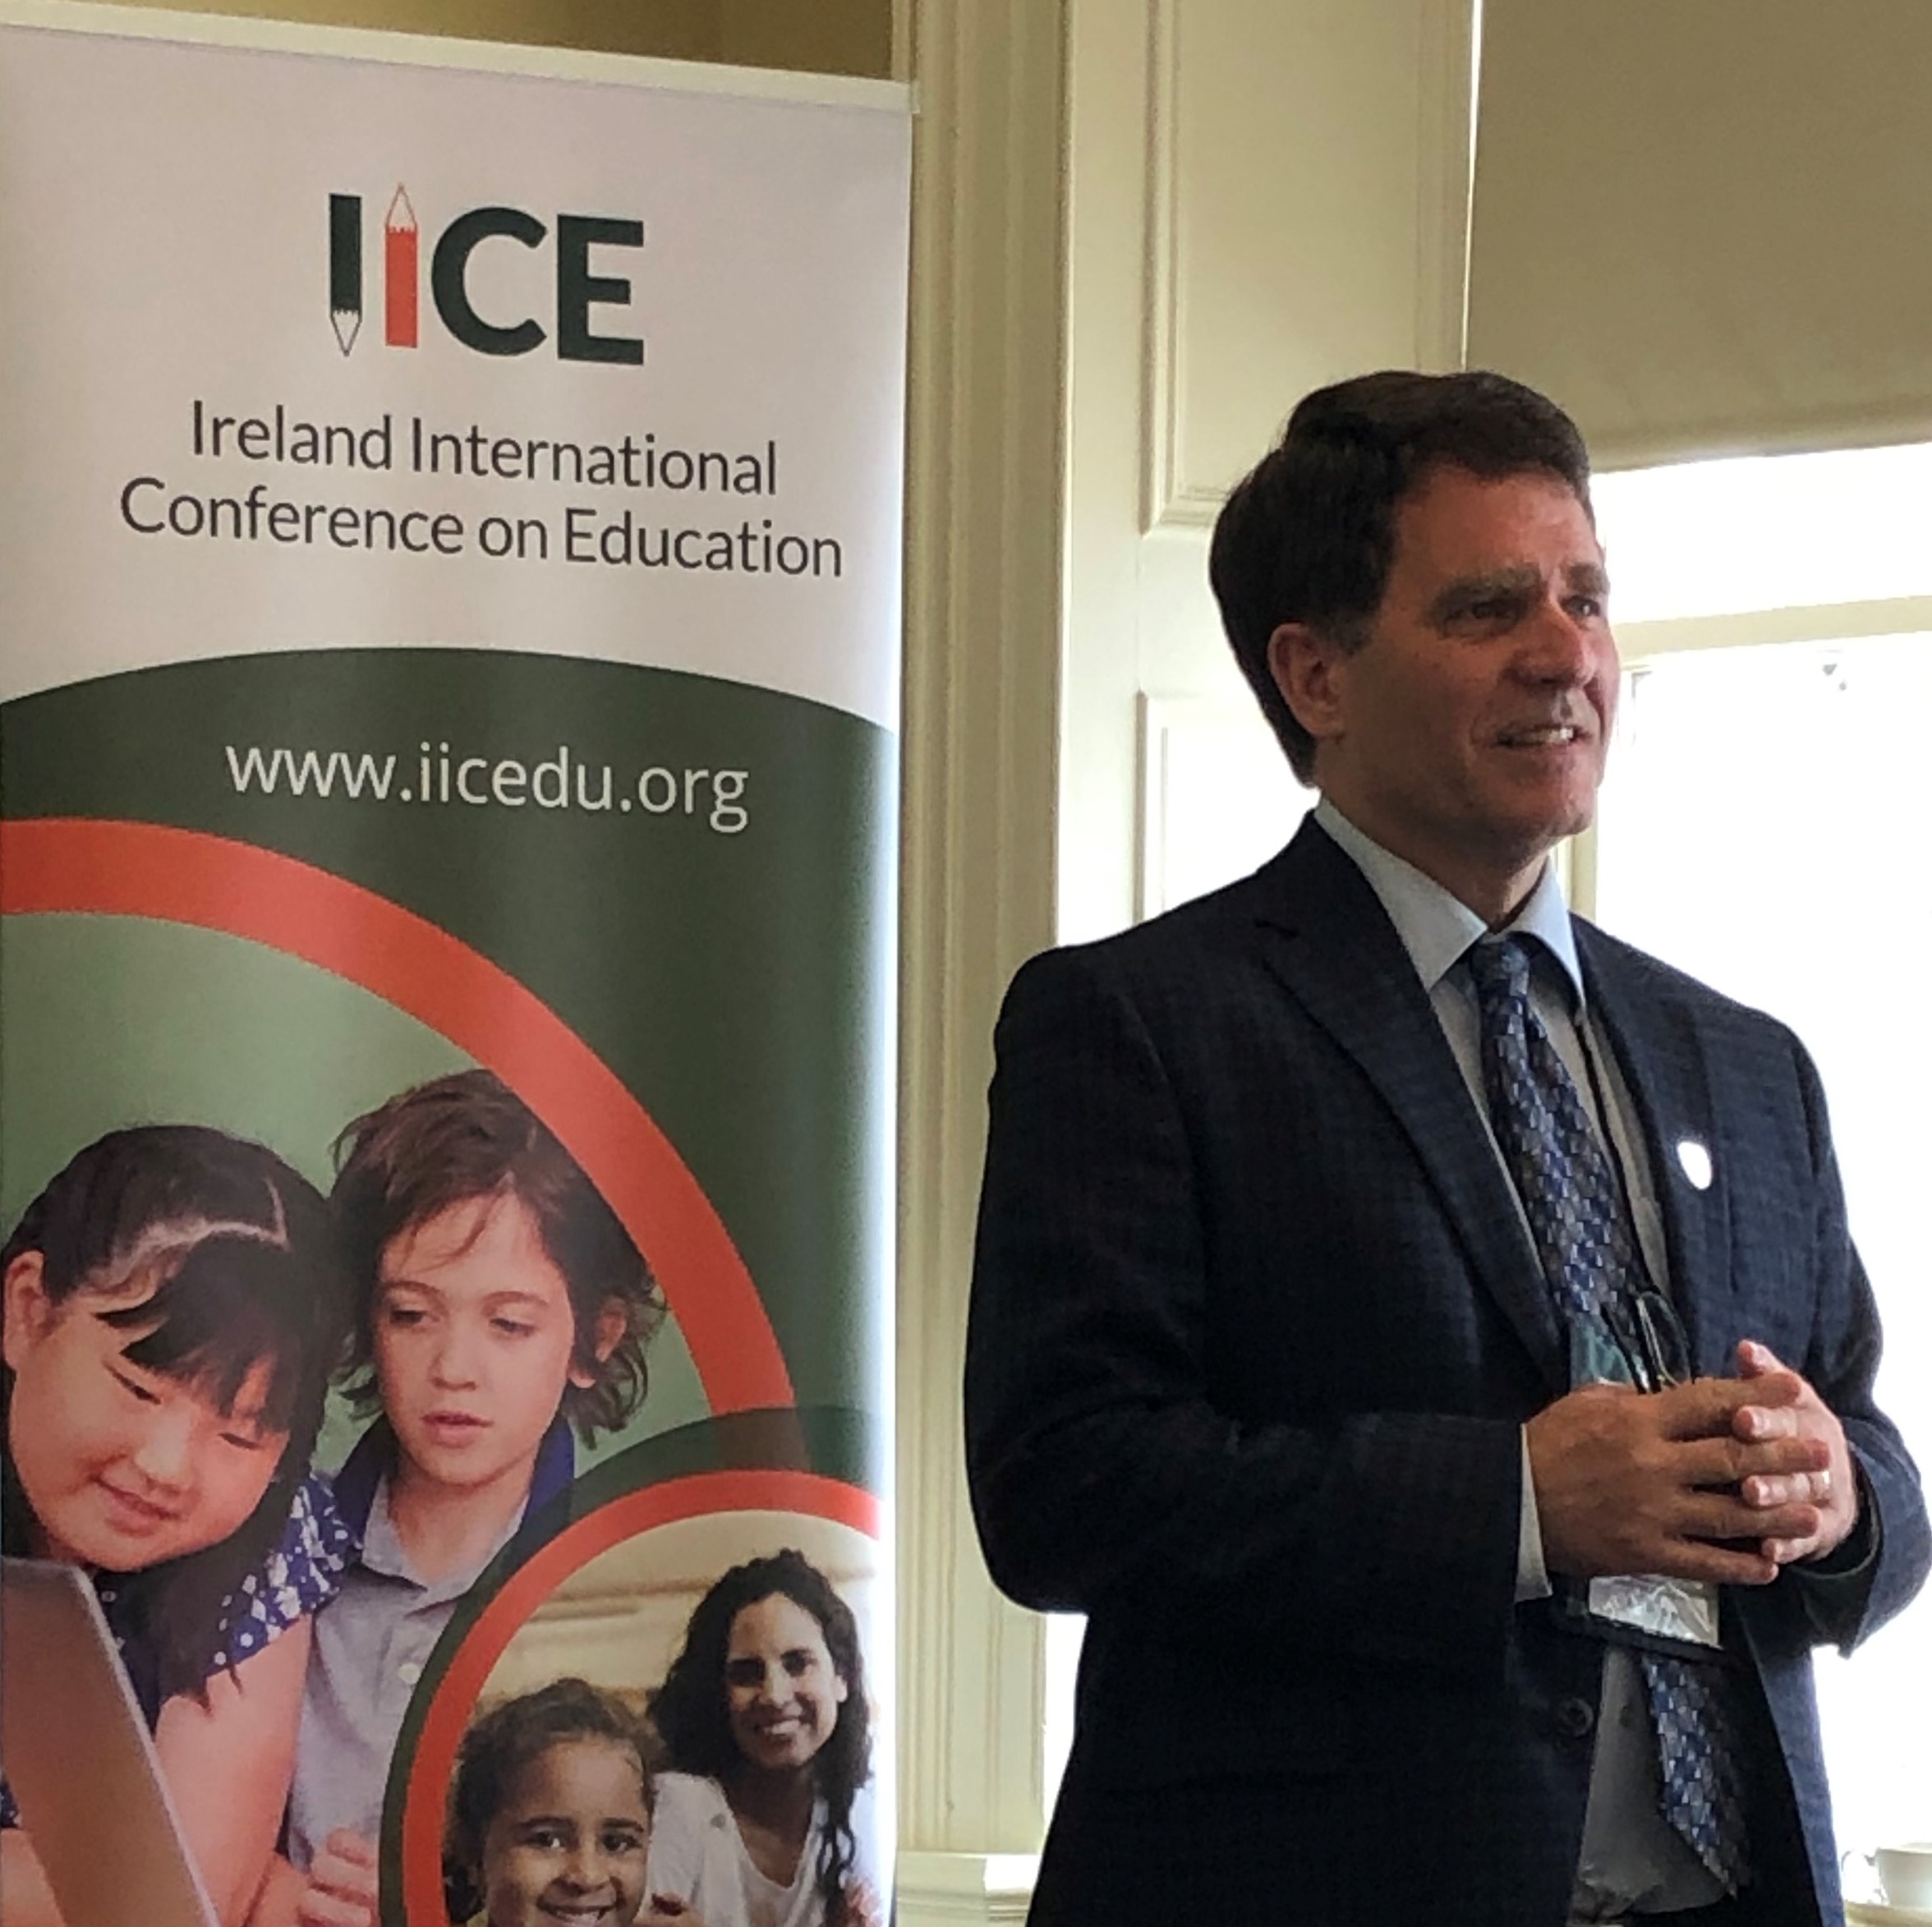 Dr. Smith presenting the results of the international student teaching study to the Ireland International Conference on Education, 2019